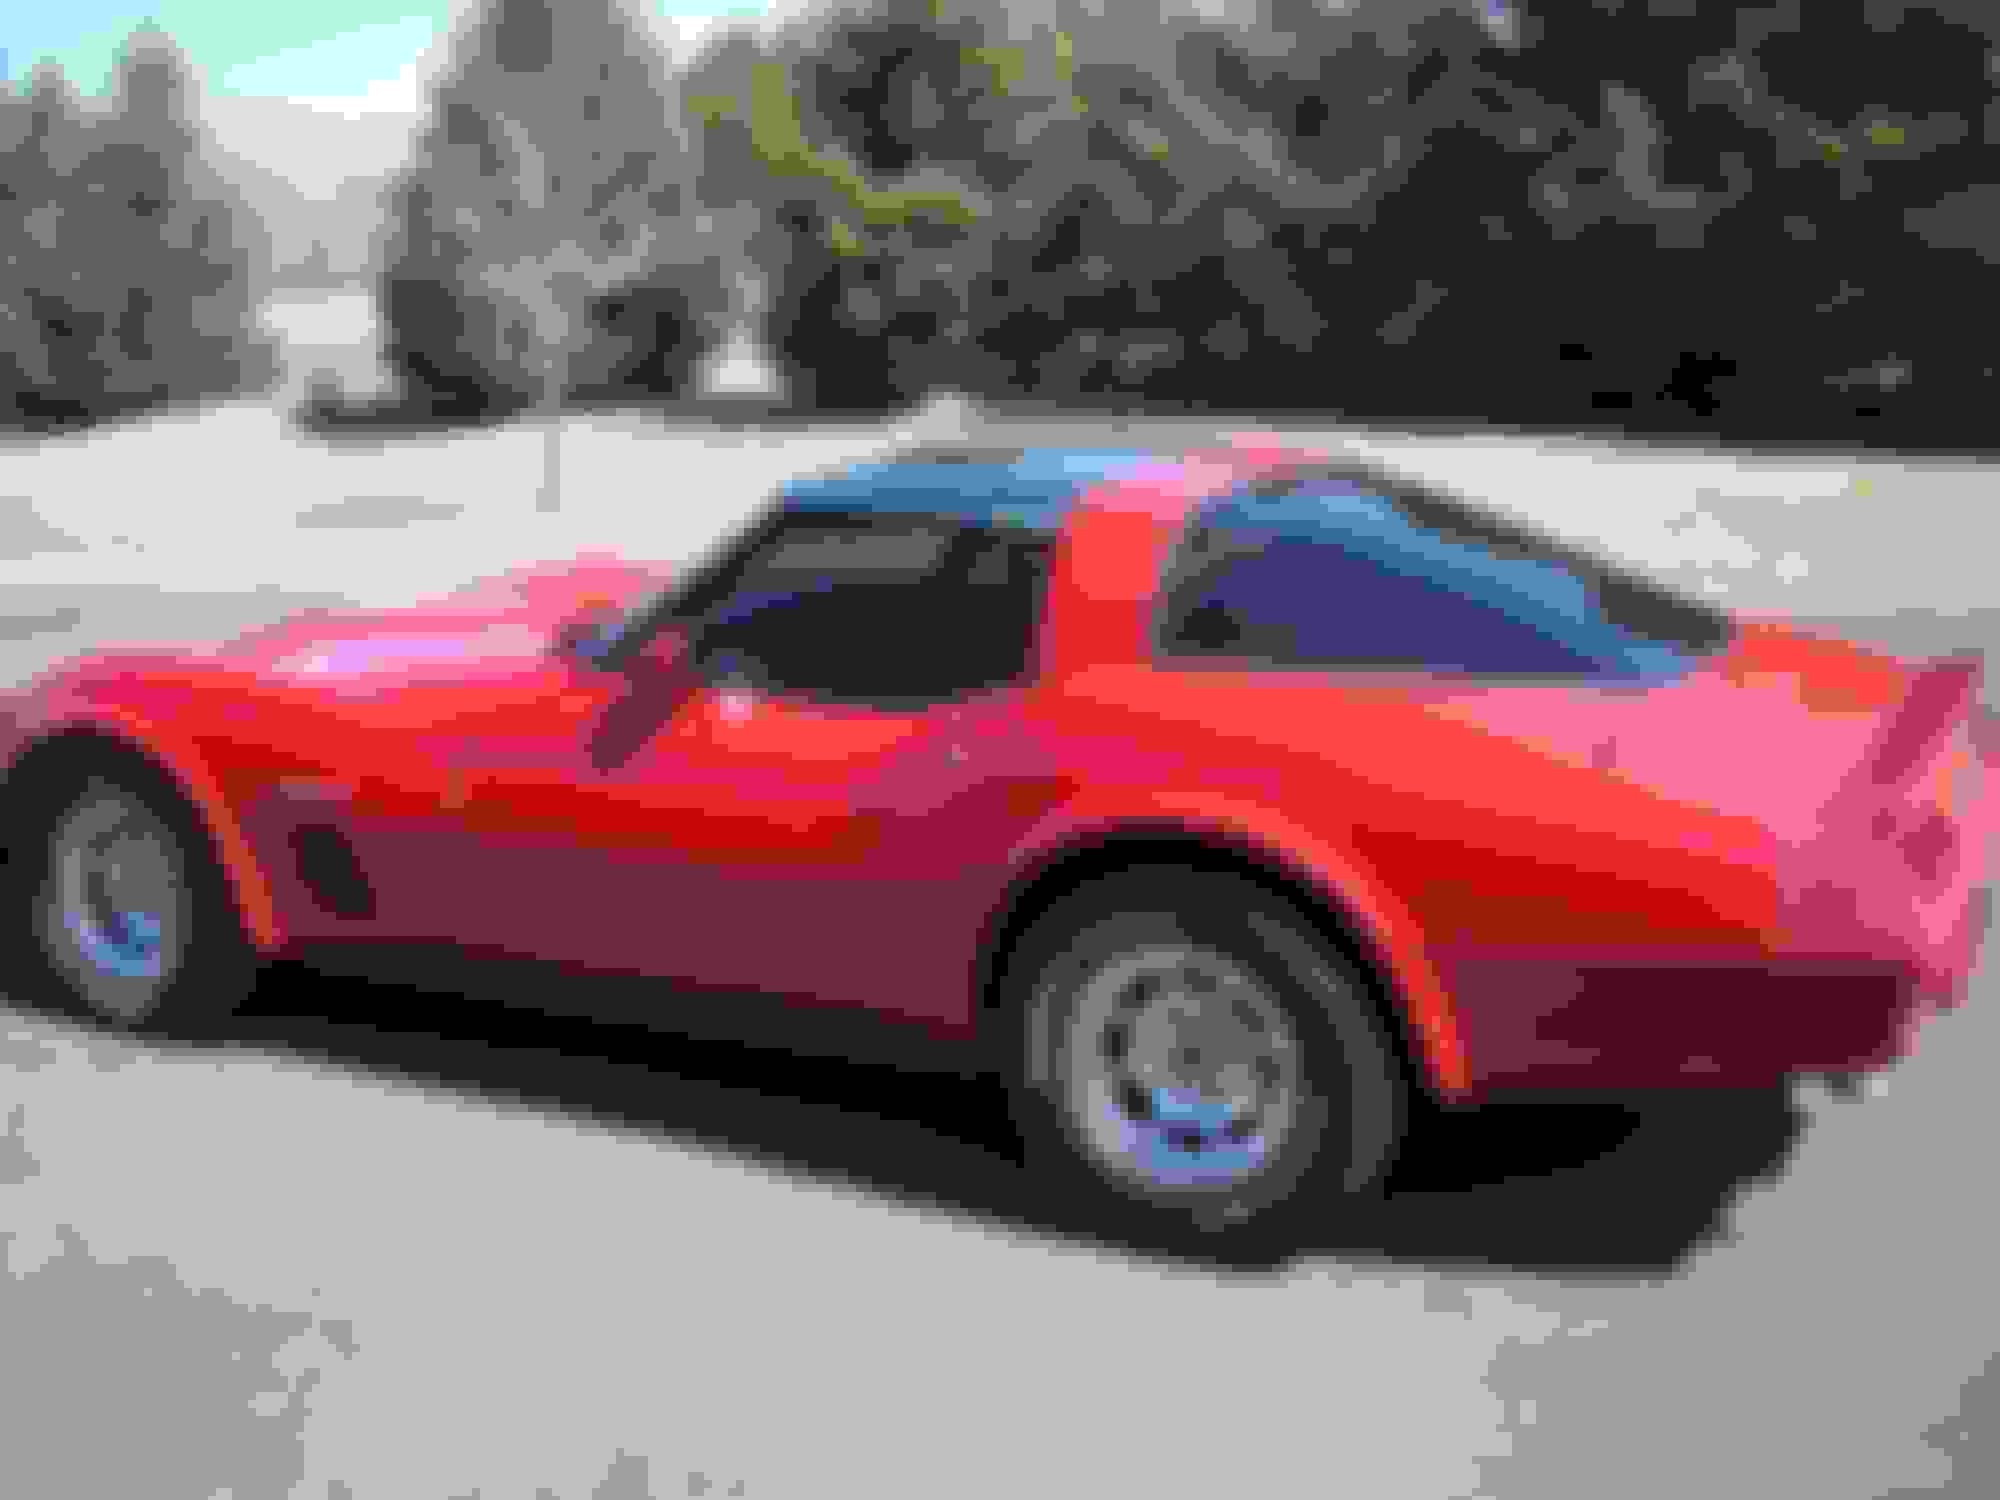 SOLD [WI] 1982 Coupe Red/Red 8,499 CorvetteForum